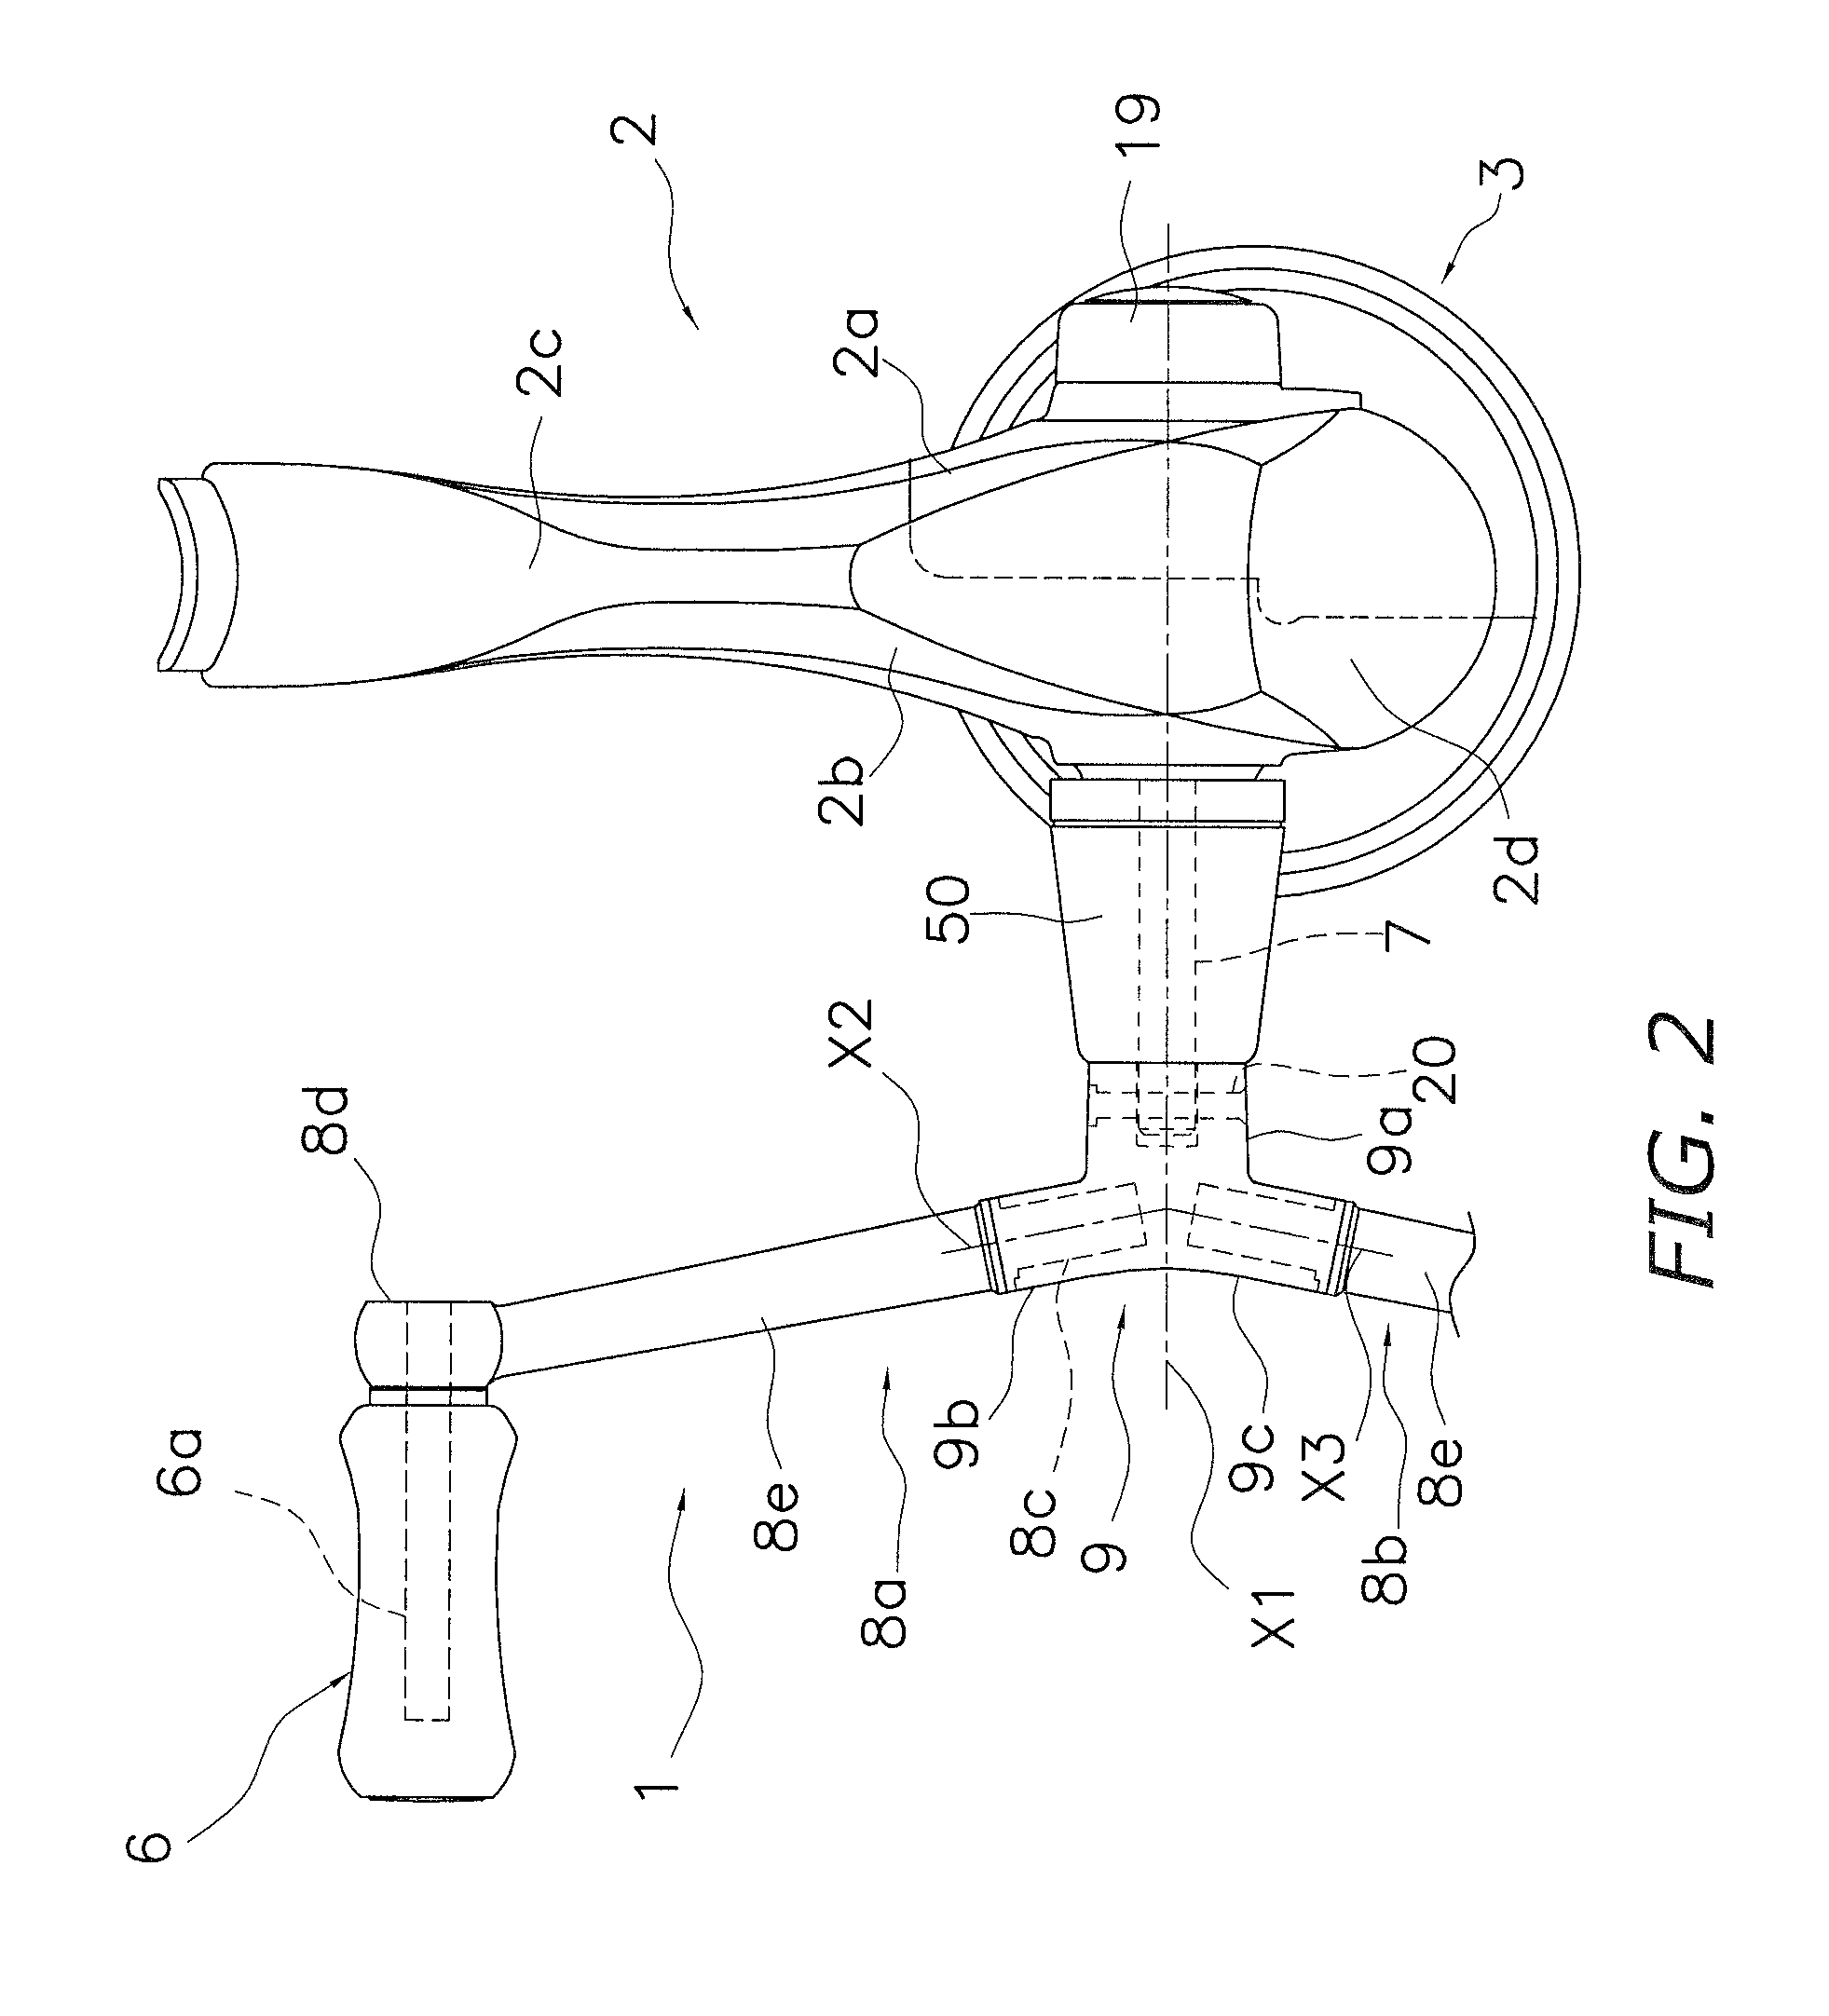 Fishing reel handle assembly